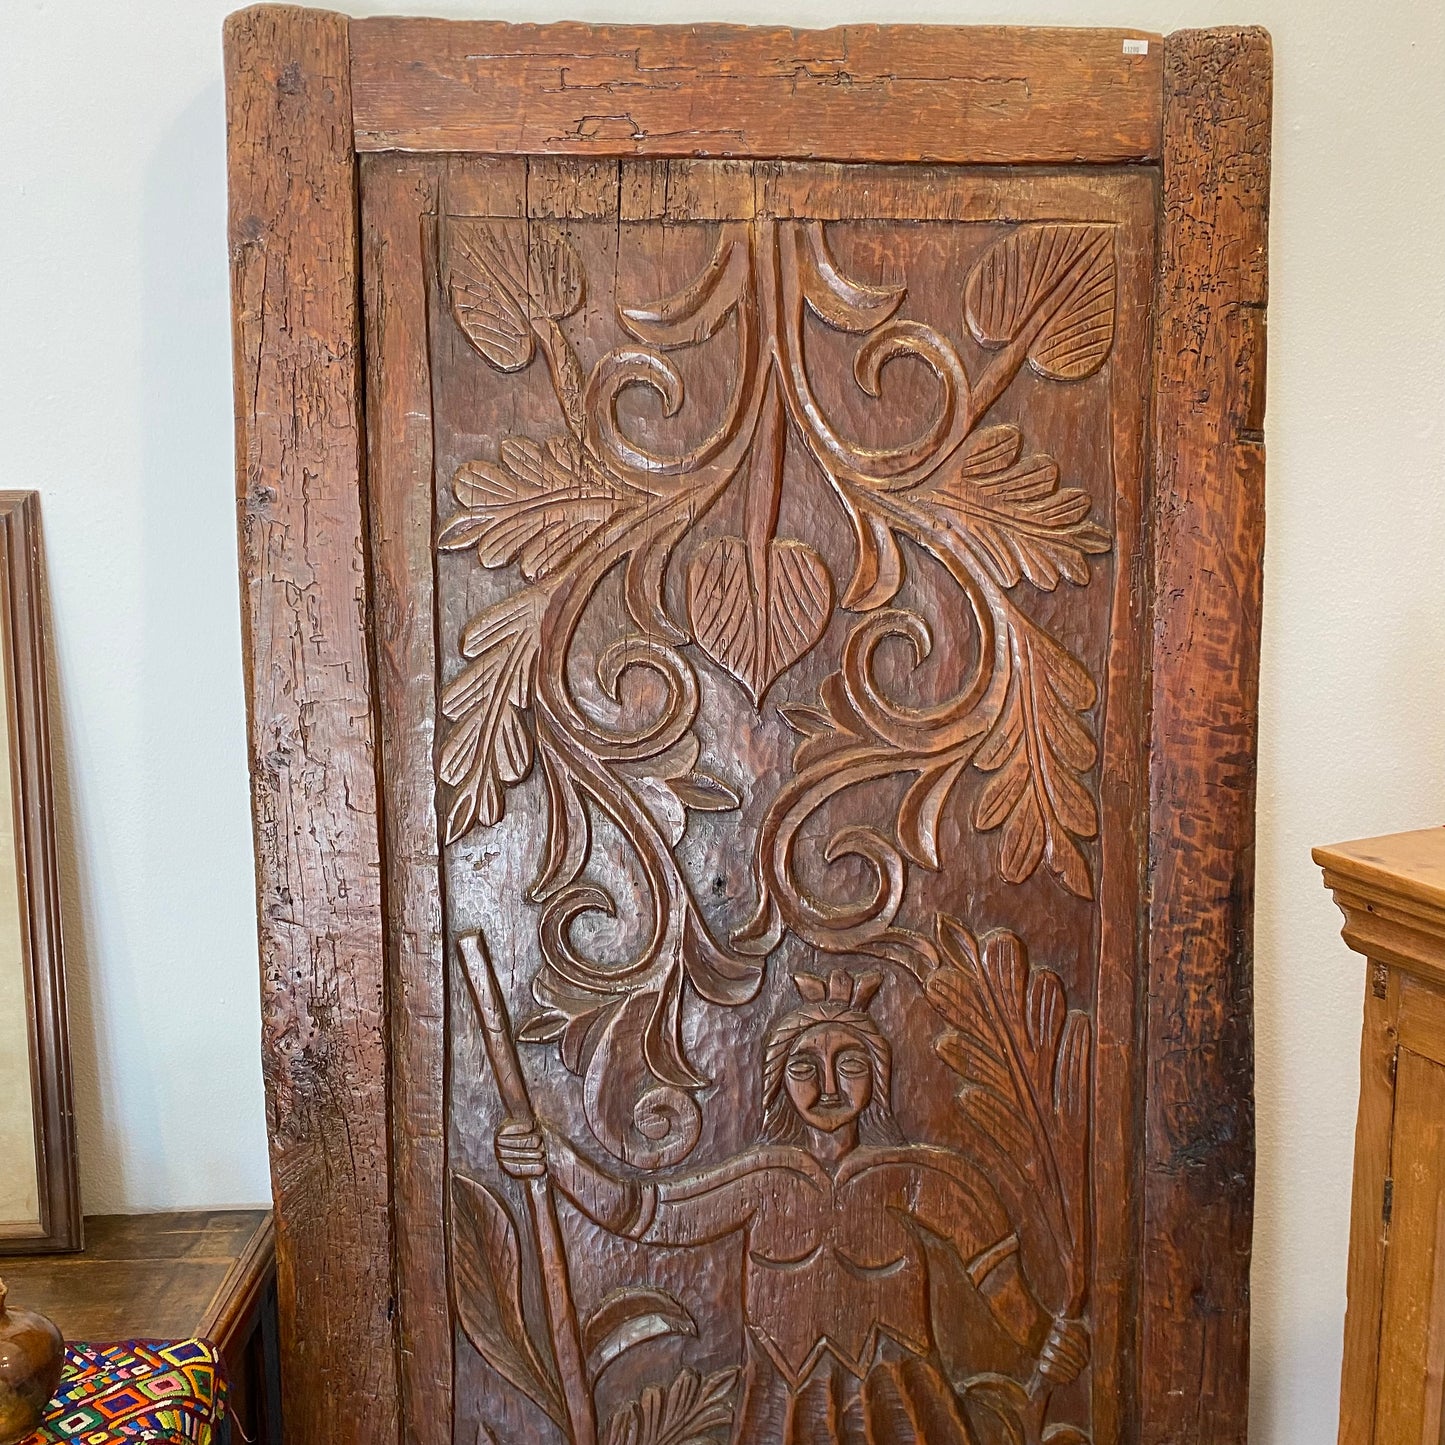 Large Carved Wooden Door from Guatemala- Native Man and Leaves